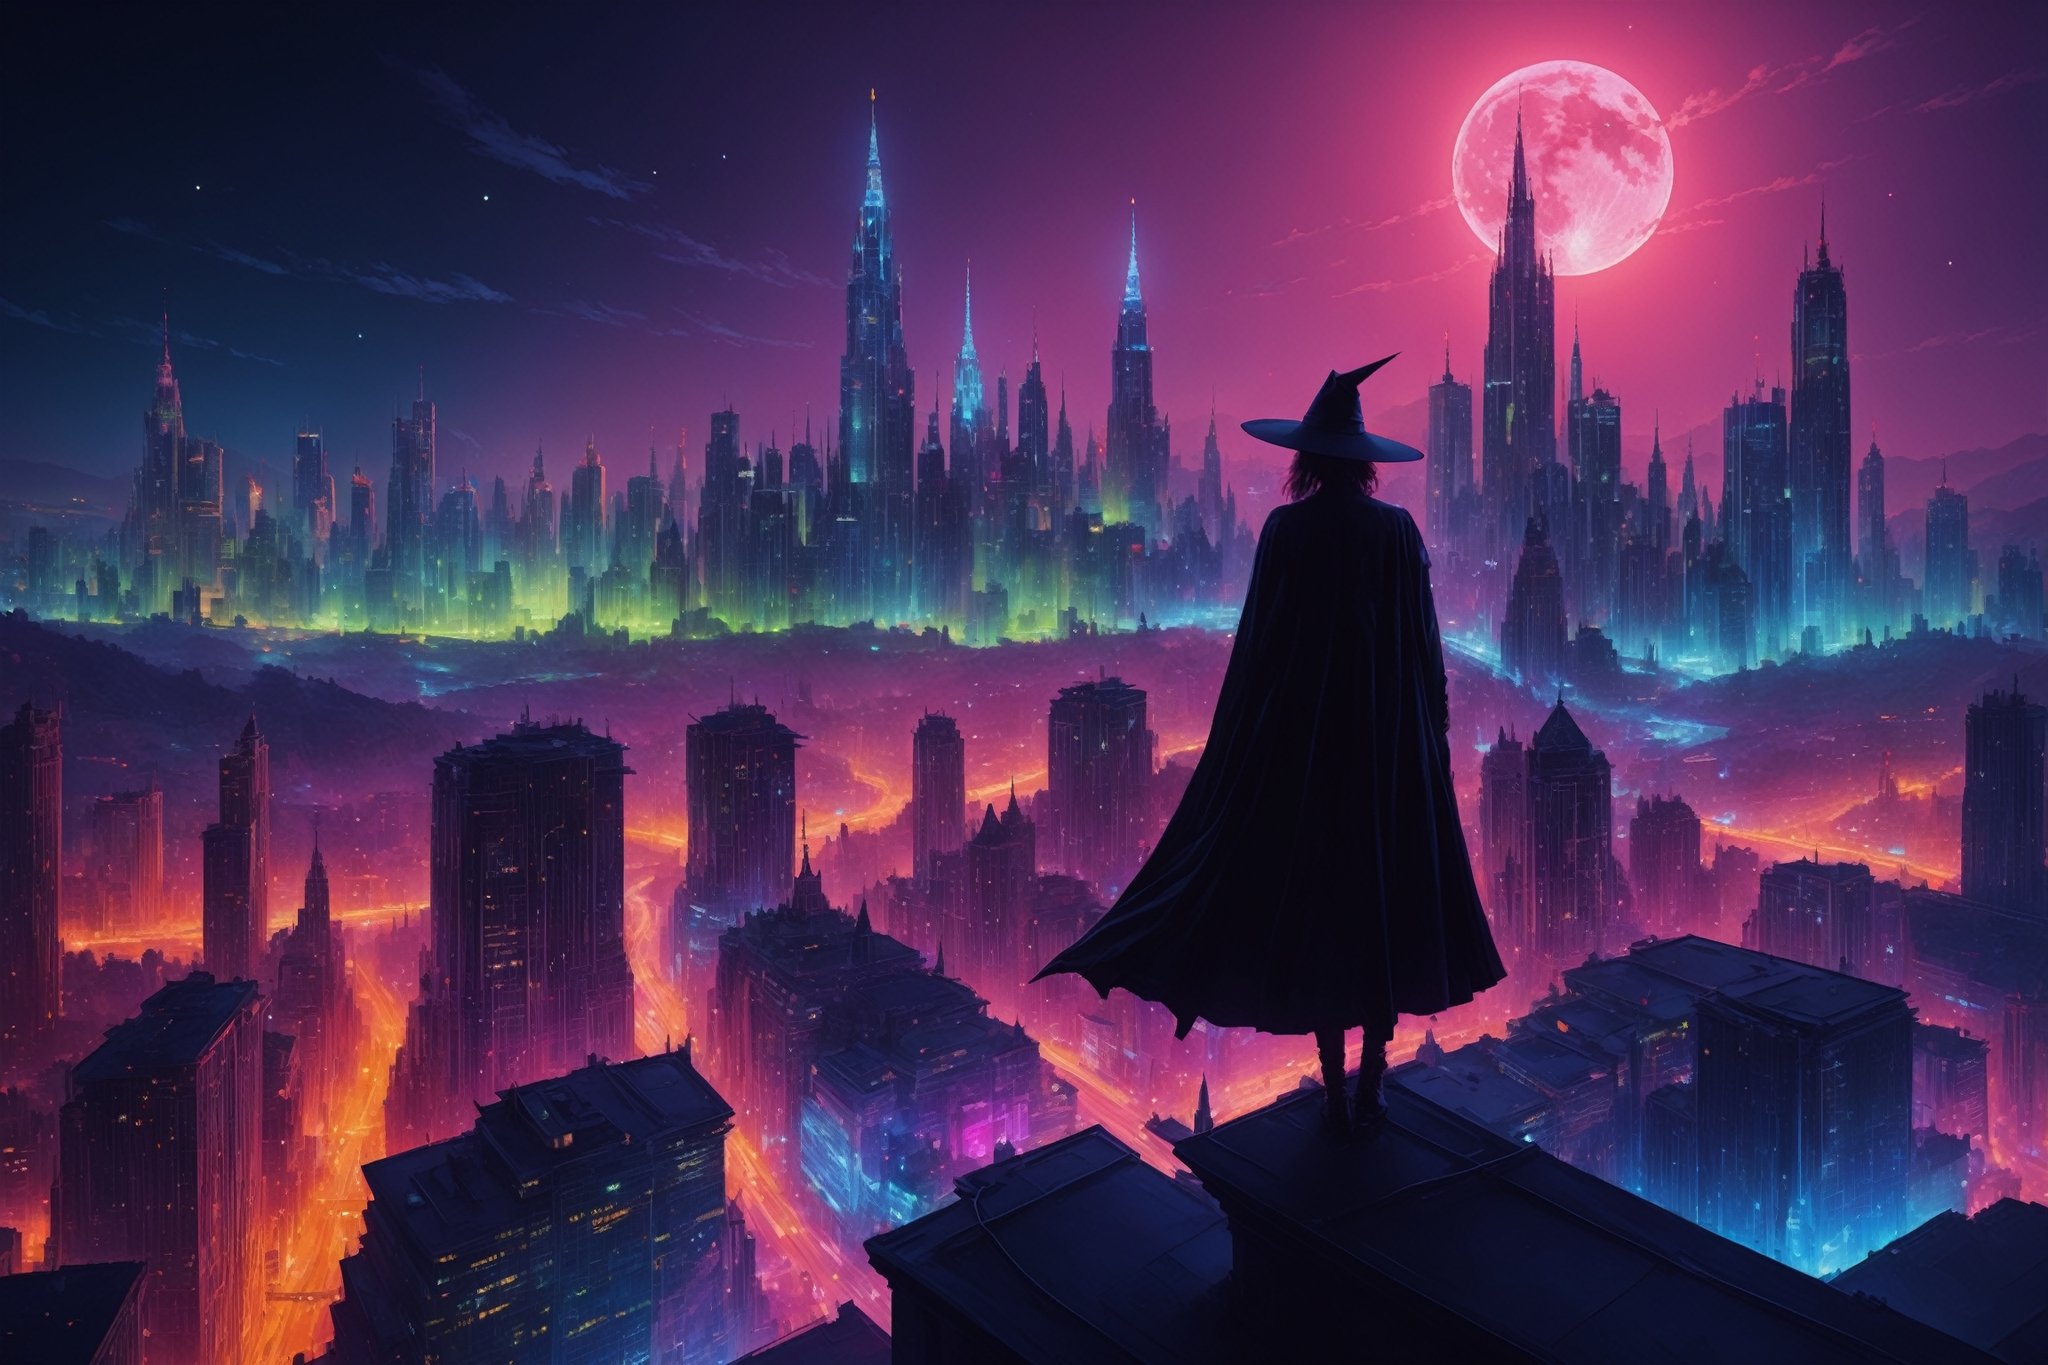 (witchery:1.3, devilish, view from top of the city, colorful, exquisite, elegant, fractal),

1girl on the roof, sexy, (blood, dagger), cross, orthodoxy,

background, (huge-neon-city:1.5, skyscrapers, neon-lights:1.5, night_sky, moon),

colors purple-pink-violet-black-blue-((lime))-azure-orange-red, neon-light, (warm-glow), 800mm lens, extreme reach, super telephoto lens

(masterpiece, (key-visual), professional-artwork, 8K, HDR, colorful, sharp-image, intricate-details),